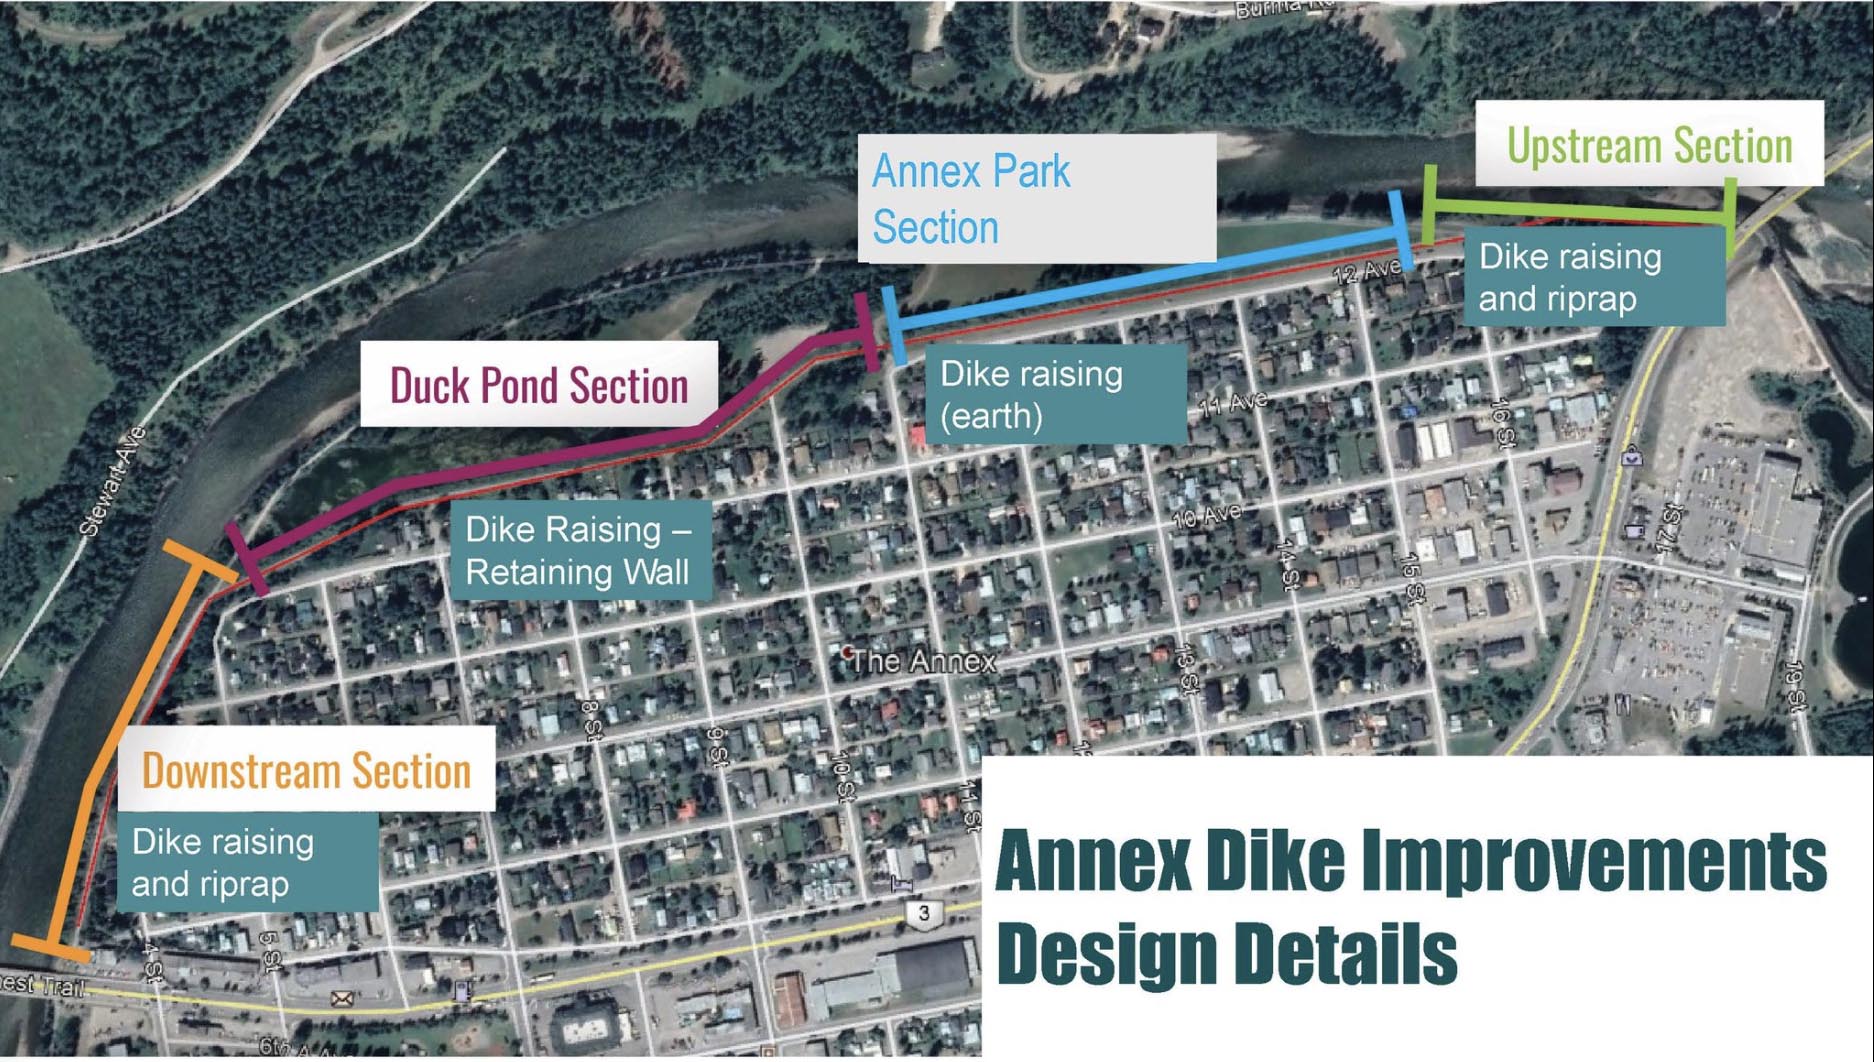 Annex Dike Flood Protection / Active Transportation Meeting